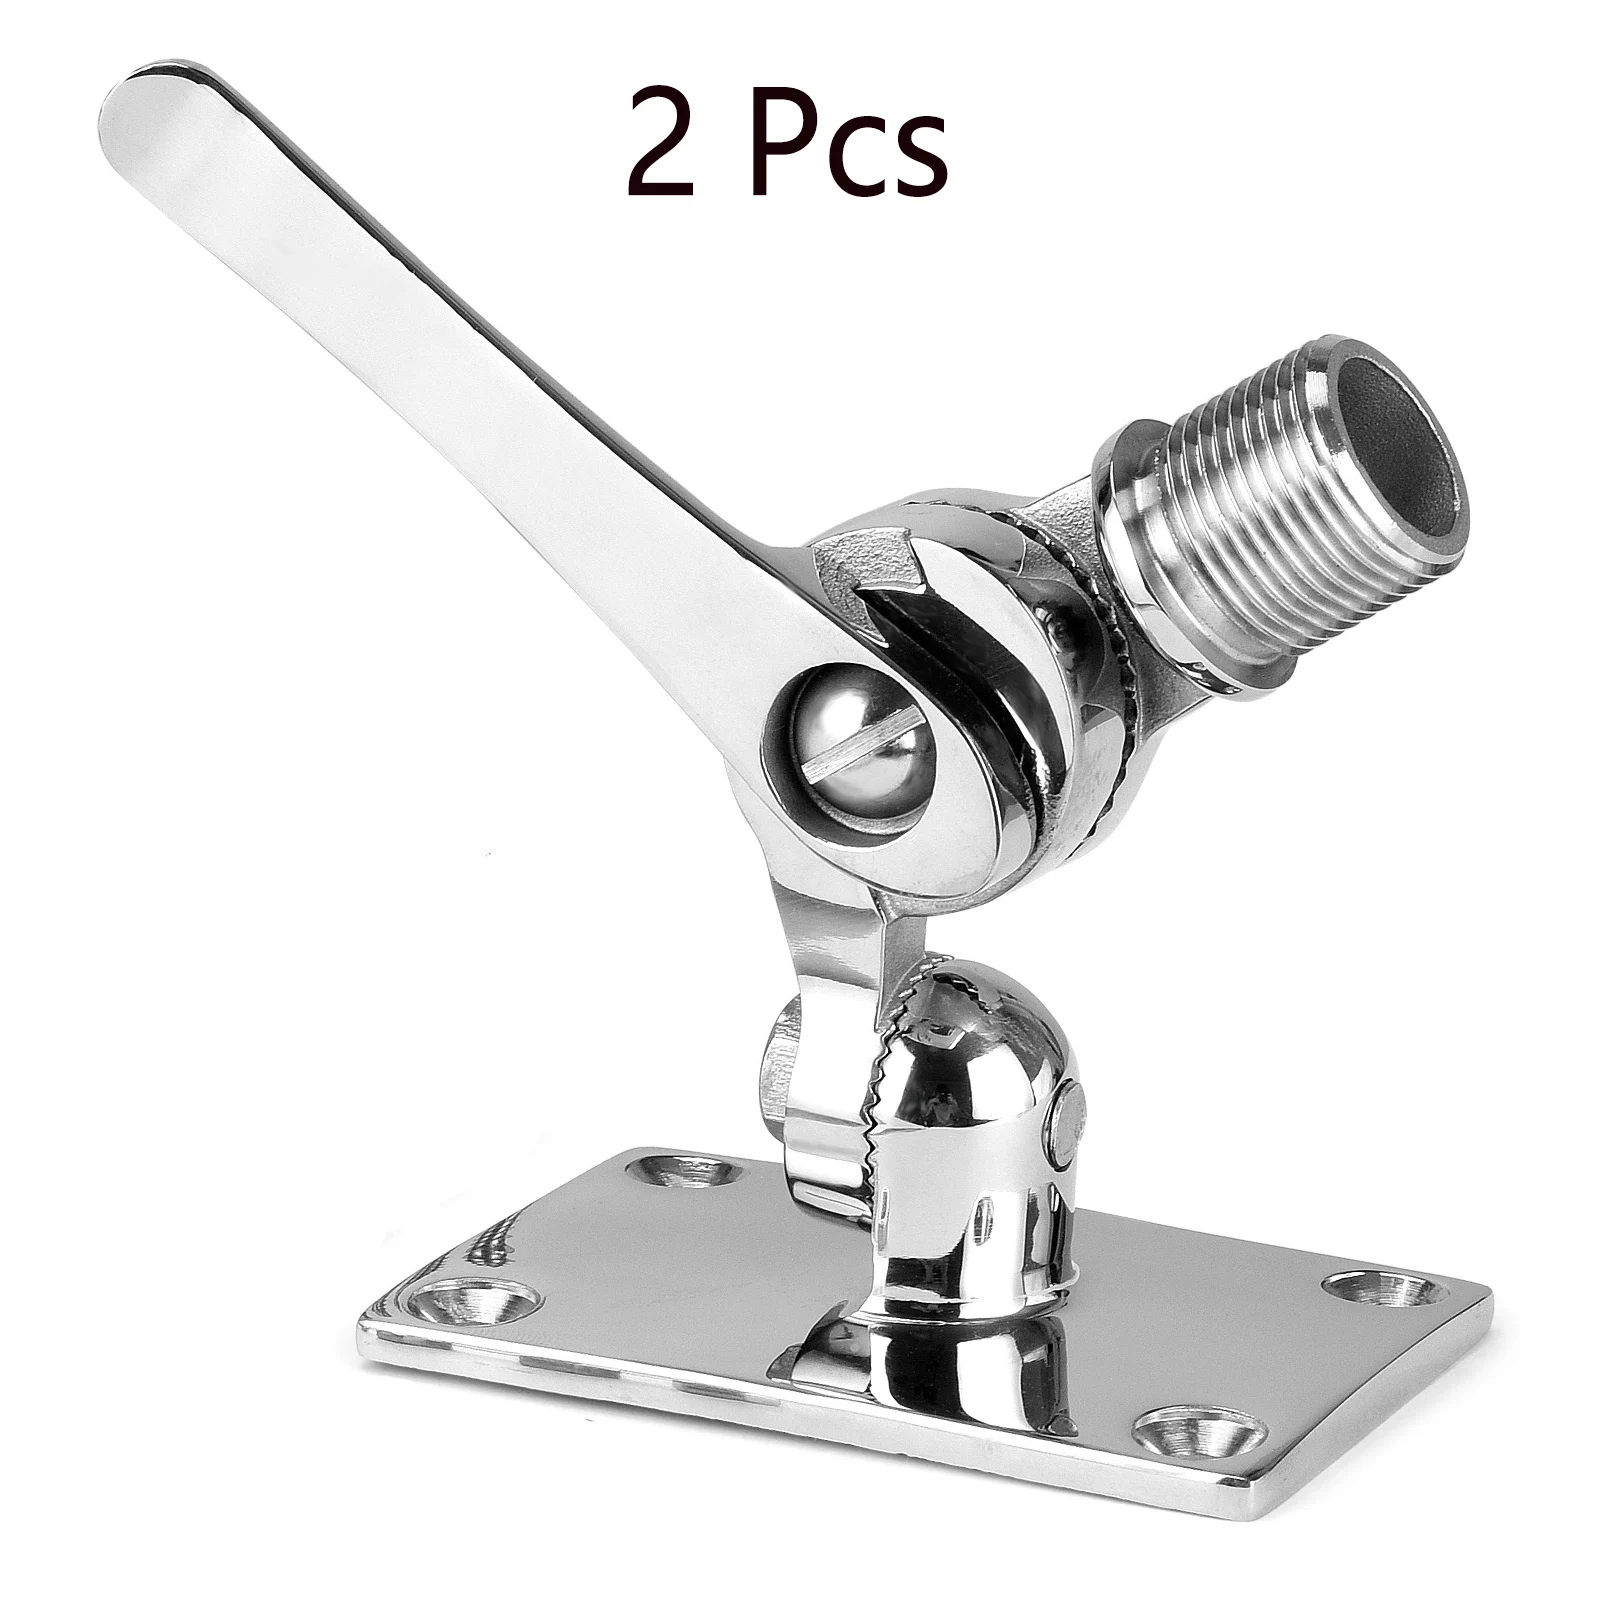 Marine VHF Antenna Mounts,  316 Stainless Steel Adjustable Base VHF Antenna Mount for Boat, Include Installation Screws,2 Pcs